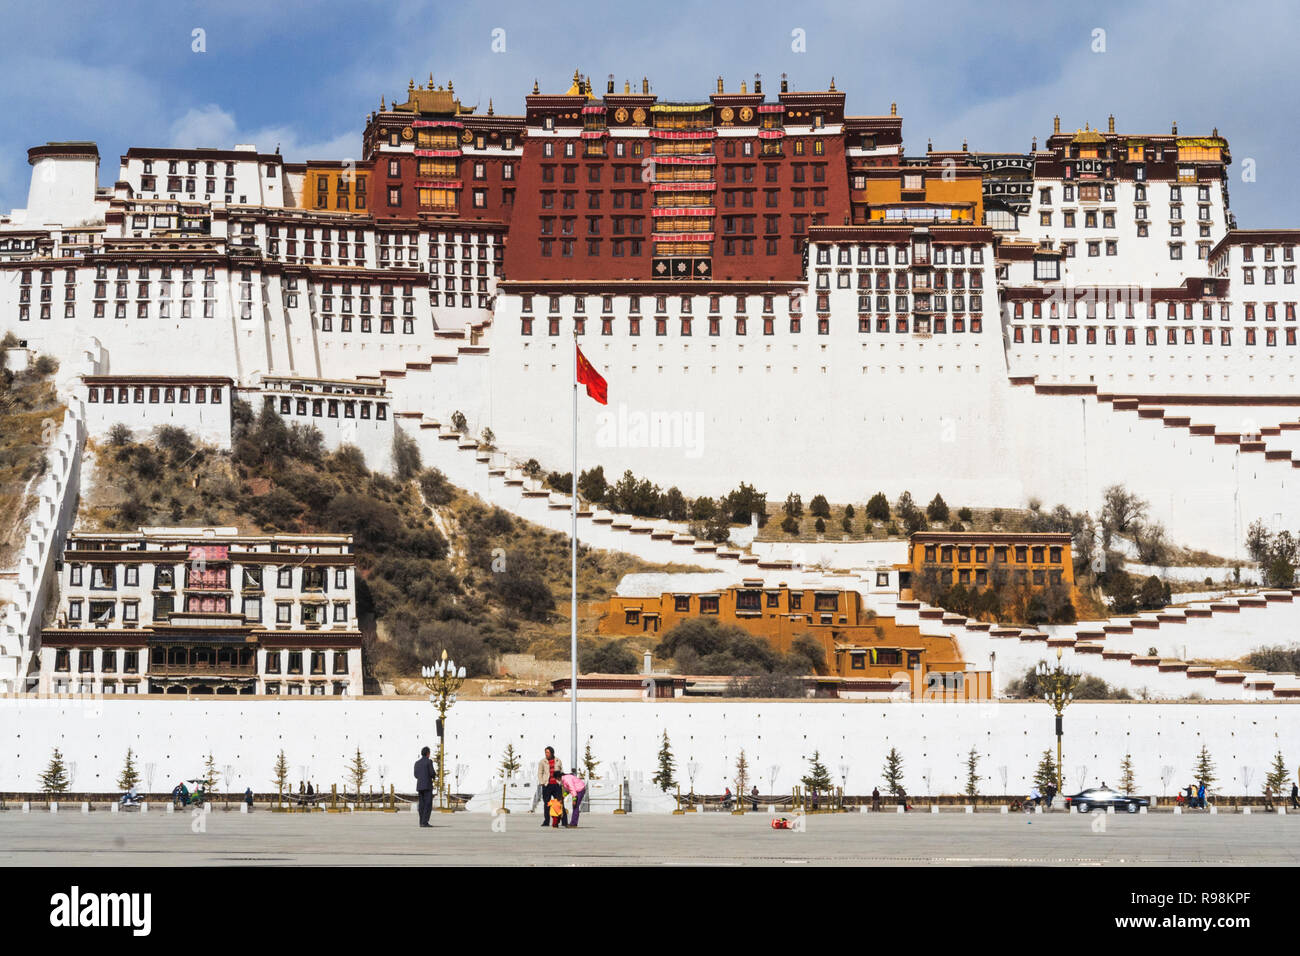 LhasaLhasa, Tibet Autonomous Region, China : Front view of the Potala Palace. First built in 1645 by the 5th Dalai Lama, the Potala was the residence  Stock Photo